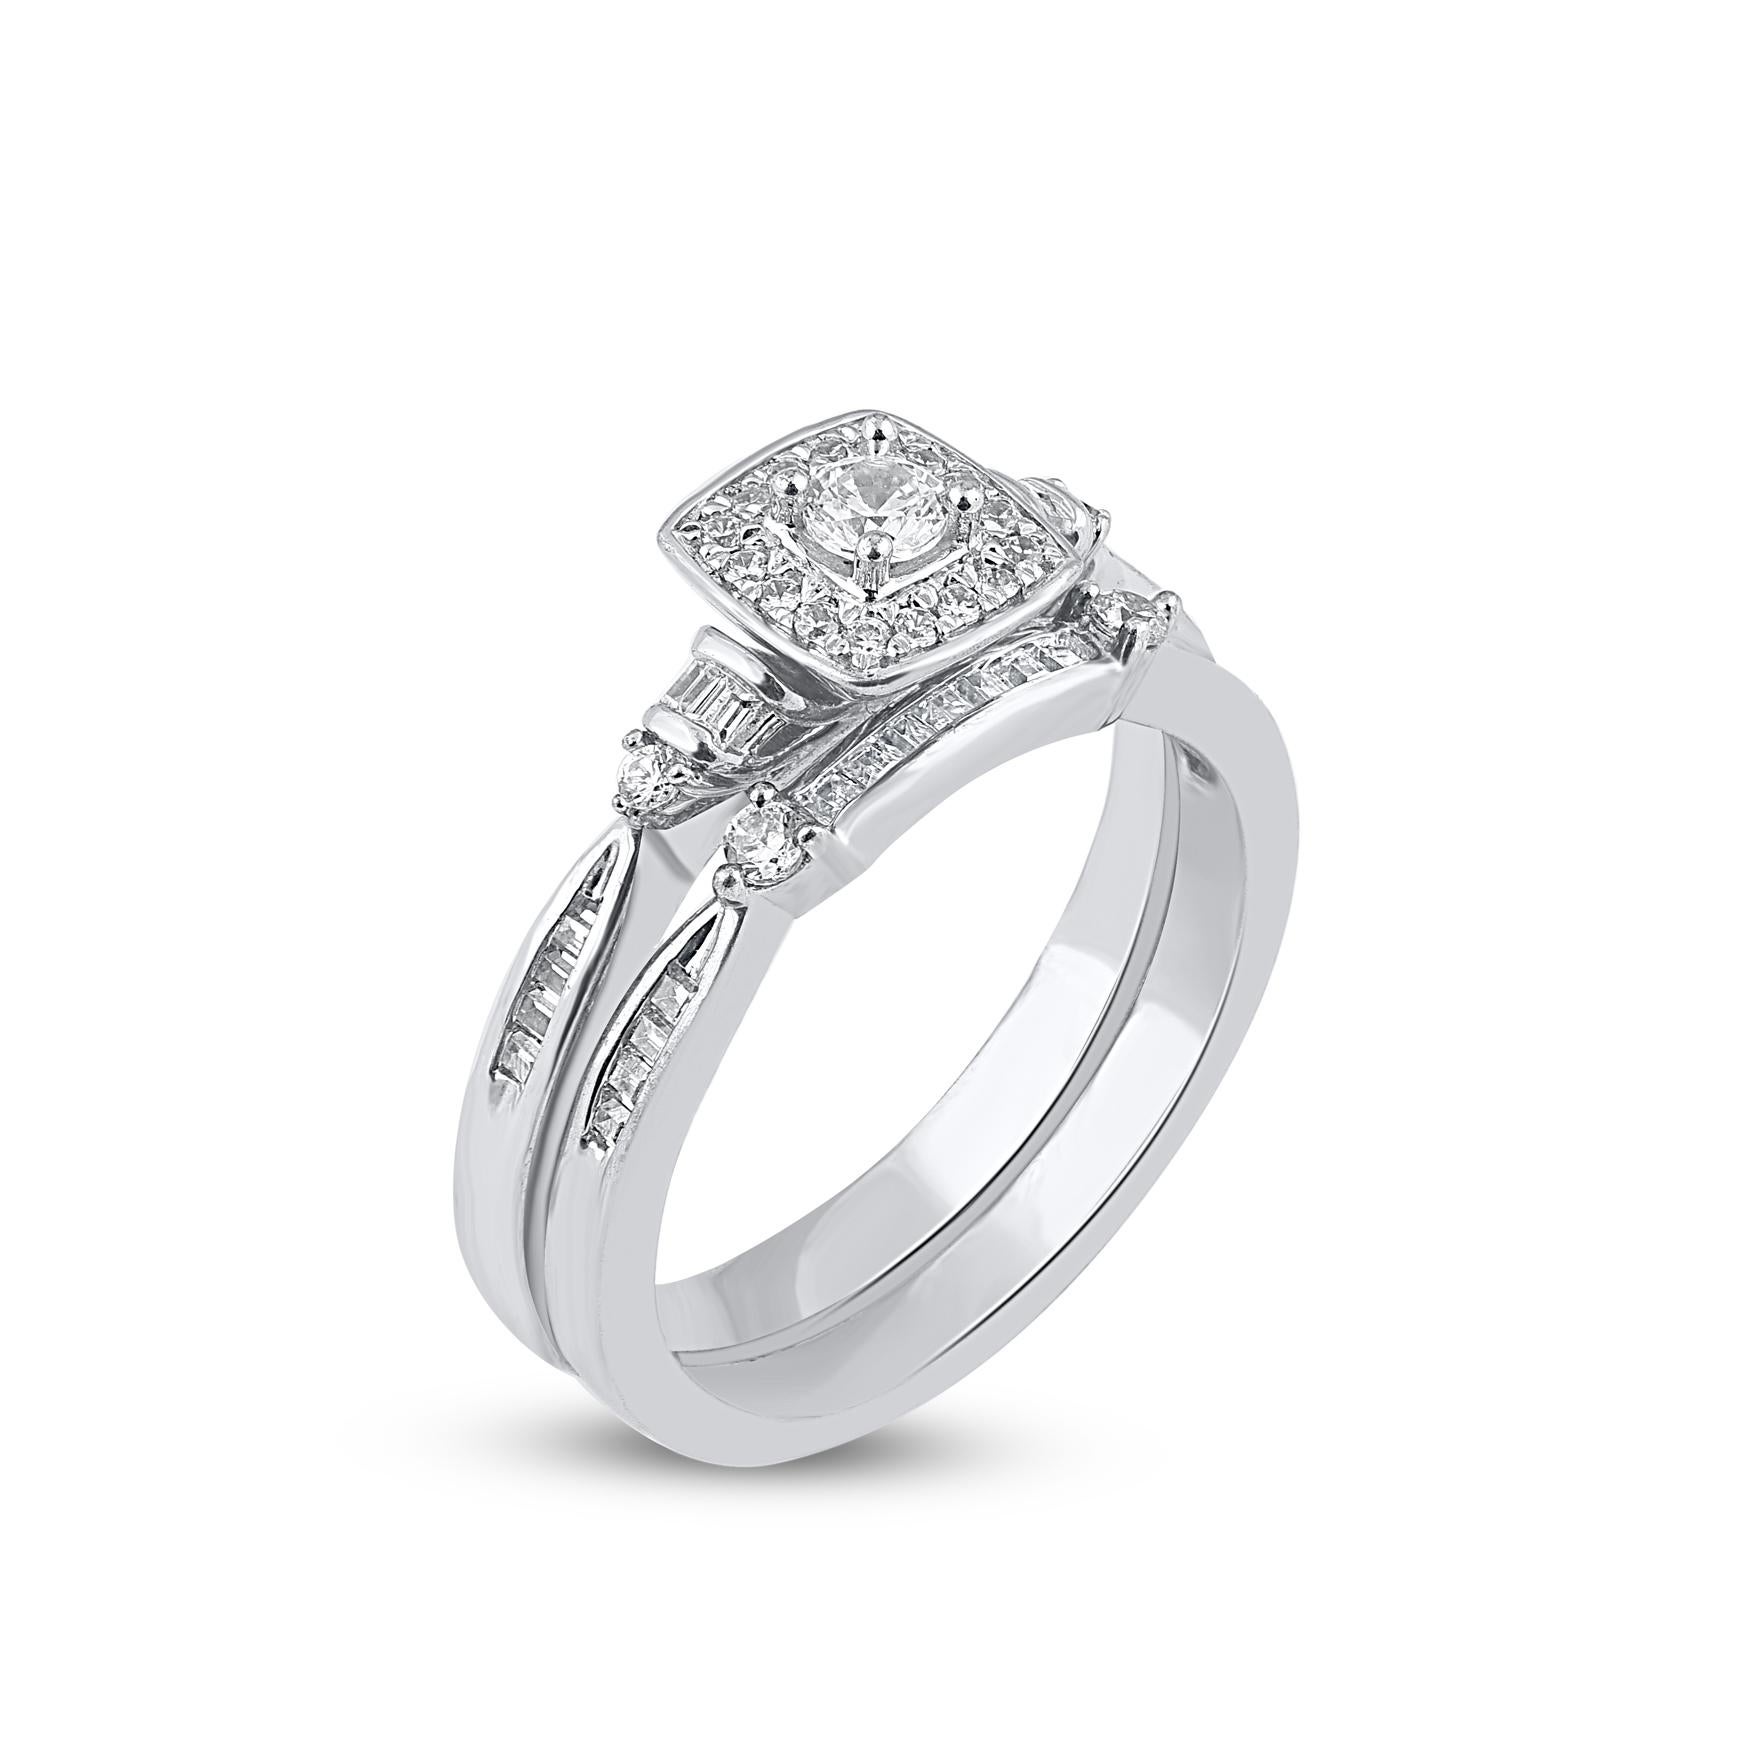 Contemporary TJD 0.50 Carat Round and Baguette cut Diamond 14KT White Gold Bridal Ring Set For Sale